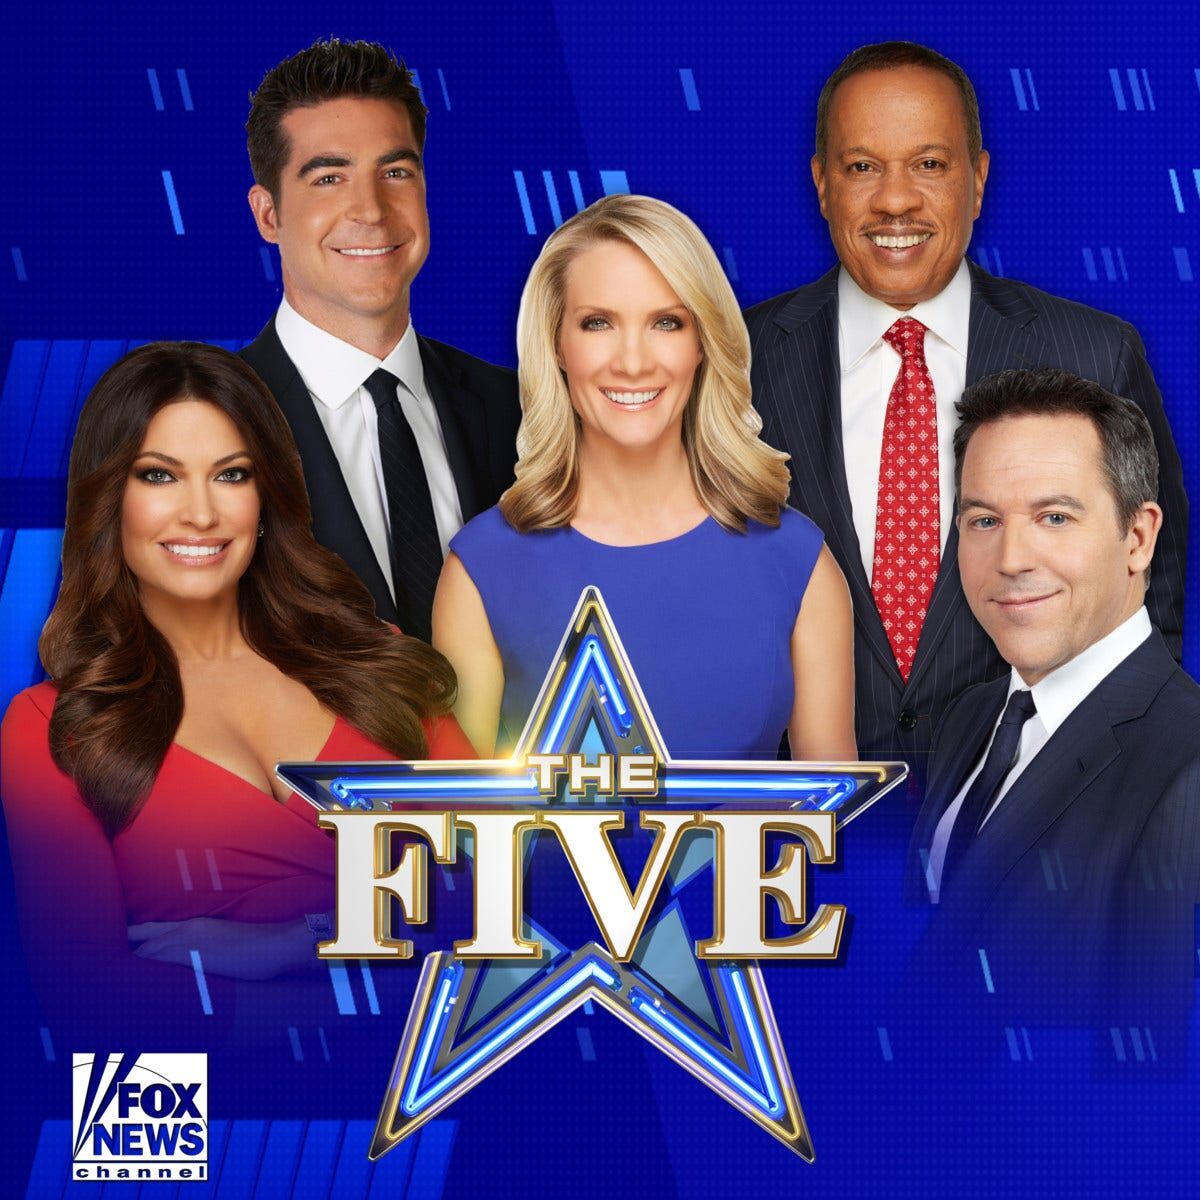 COVER TheFive 1 